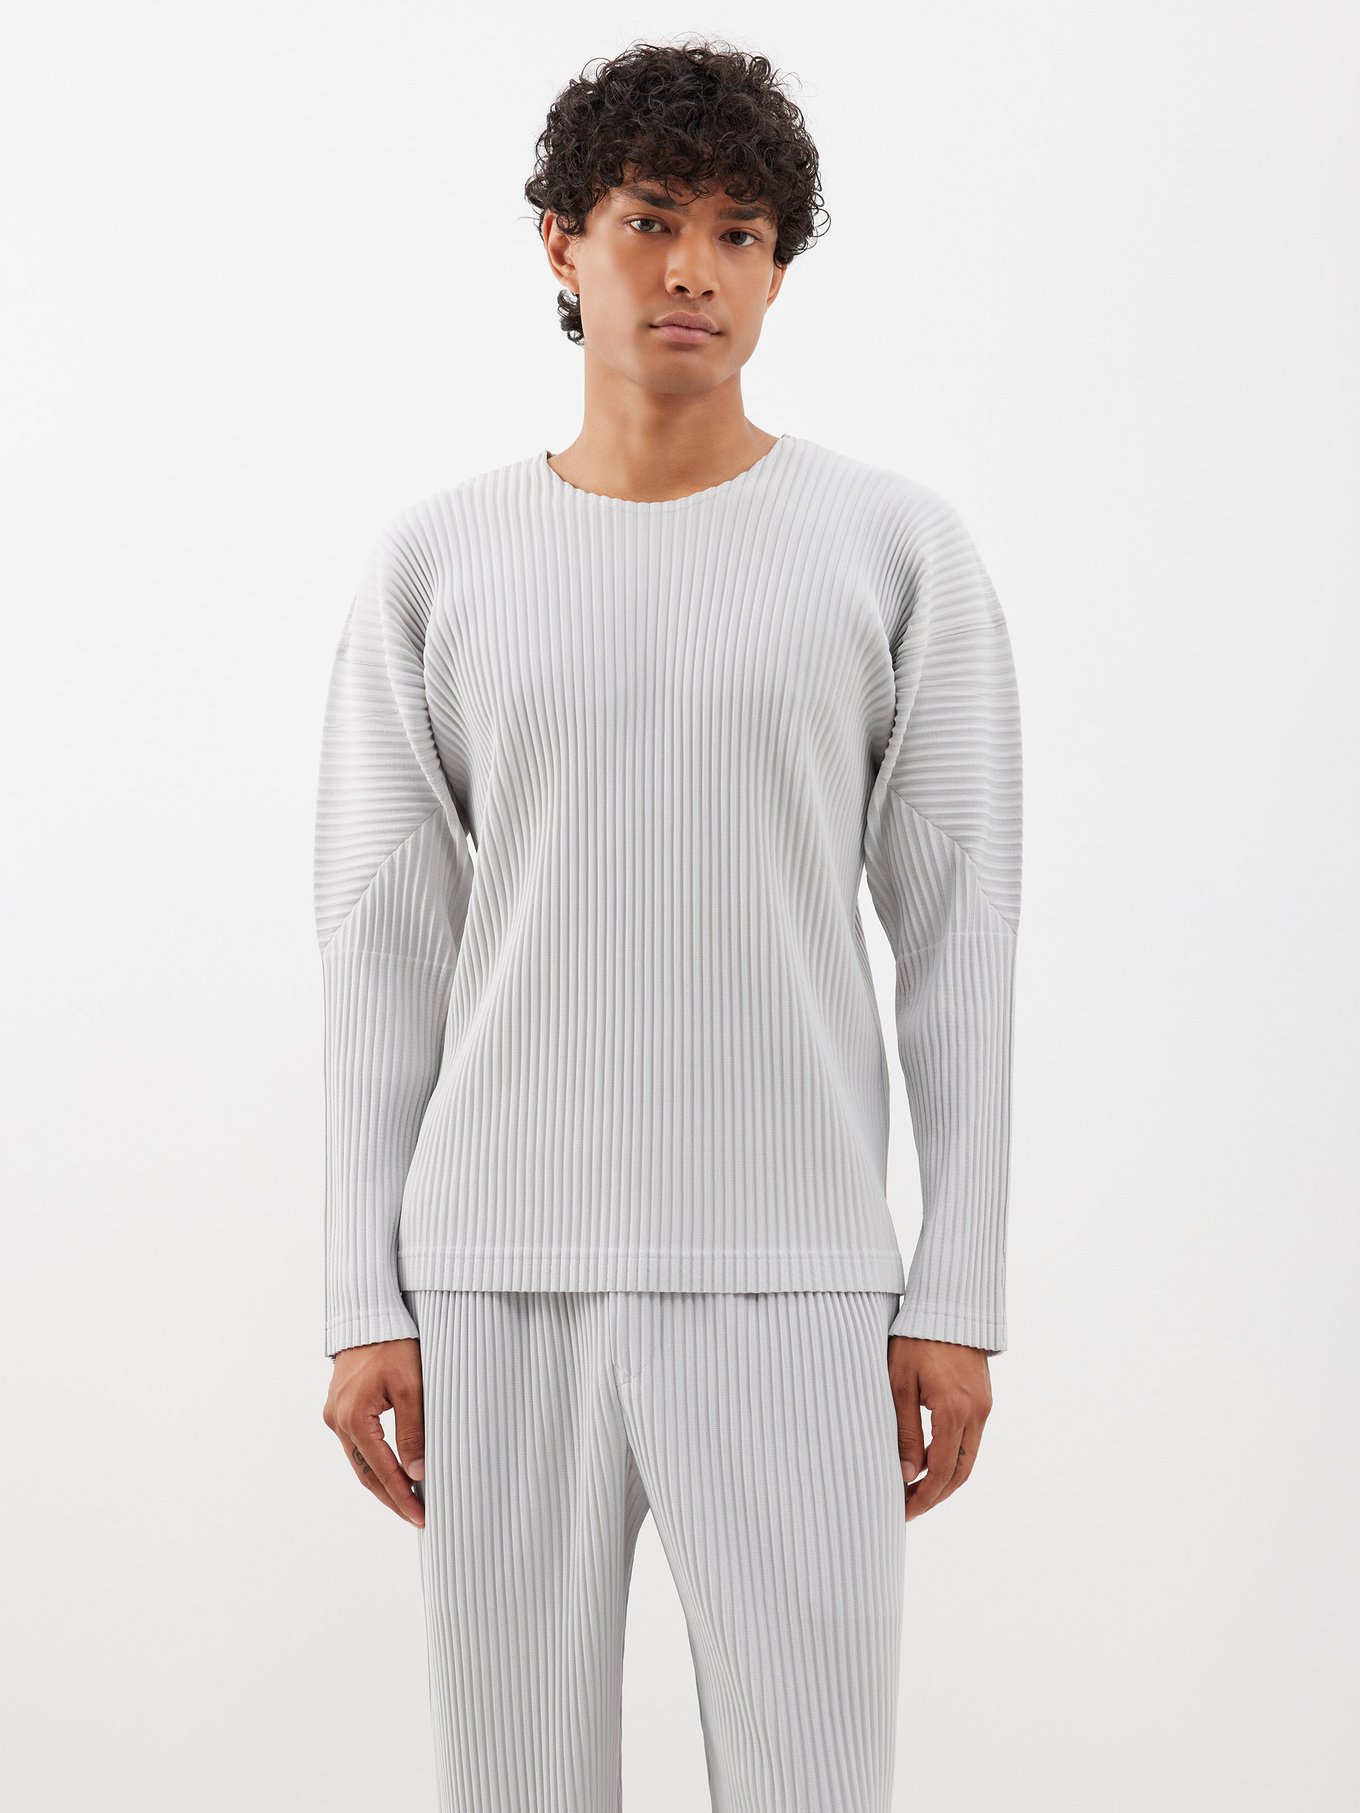 Technical-pleated top | Homme Plissé Issey Miyake